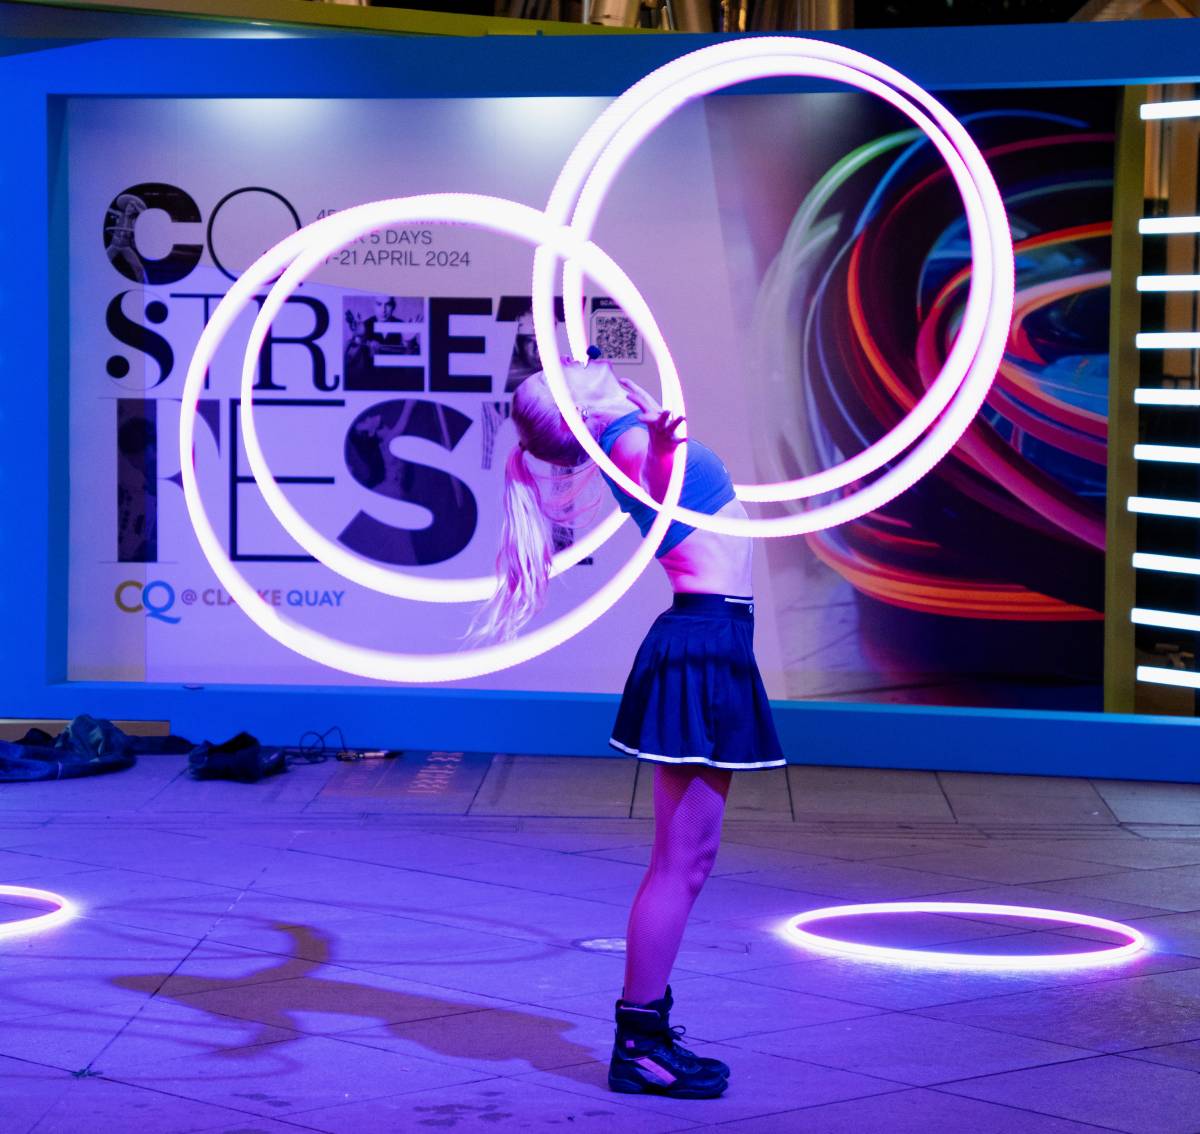 Streetfest has an electrifying start at Clarke Quay